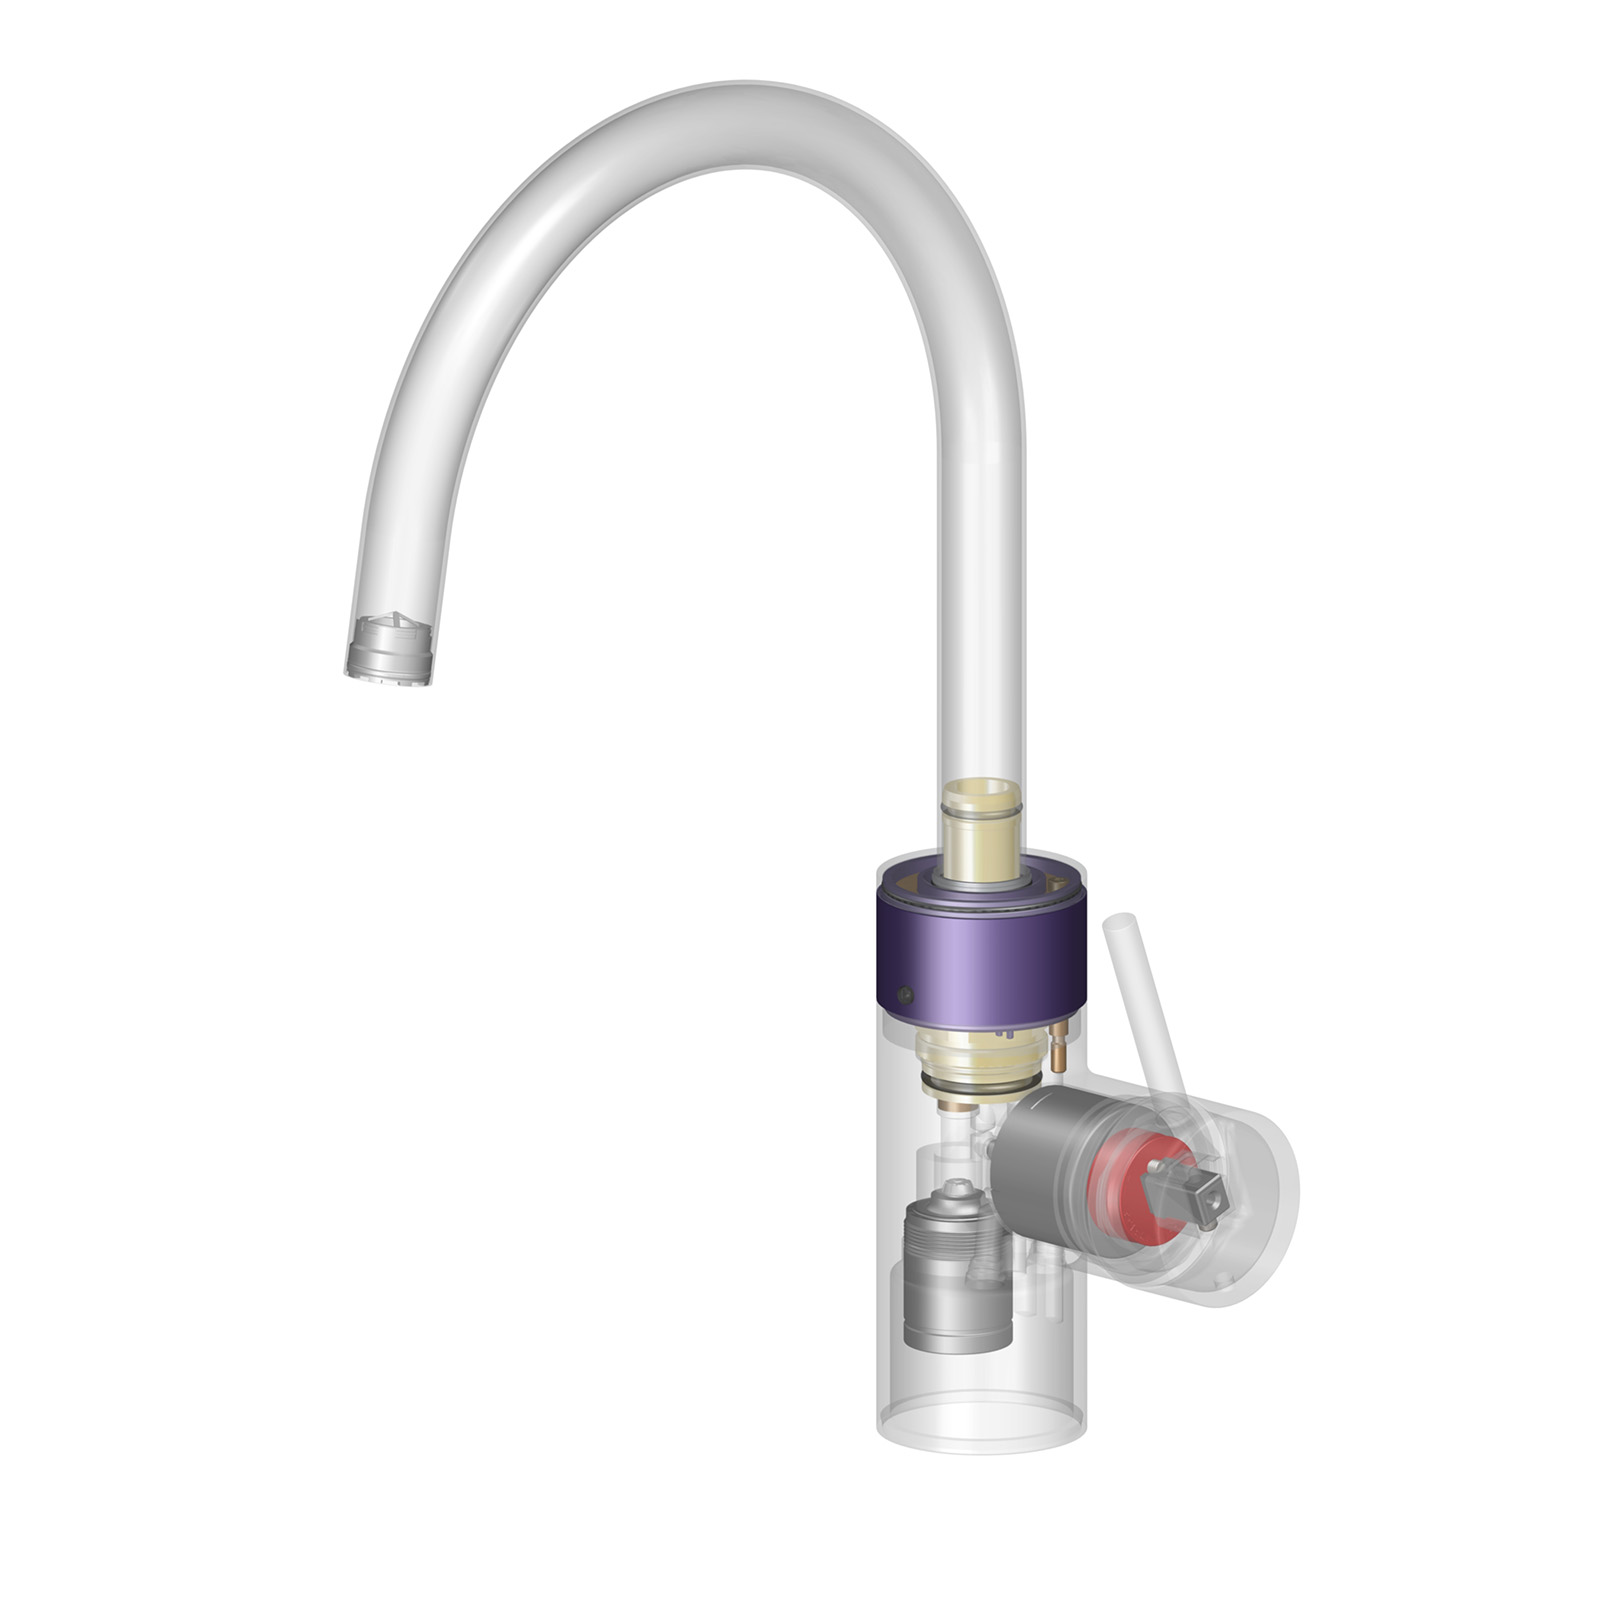 Hybrid kitchen faucets with the Aquis special-cartridge